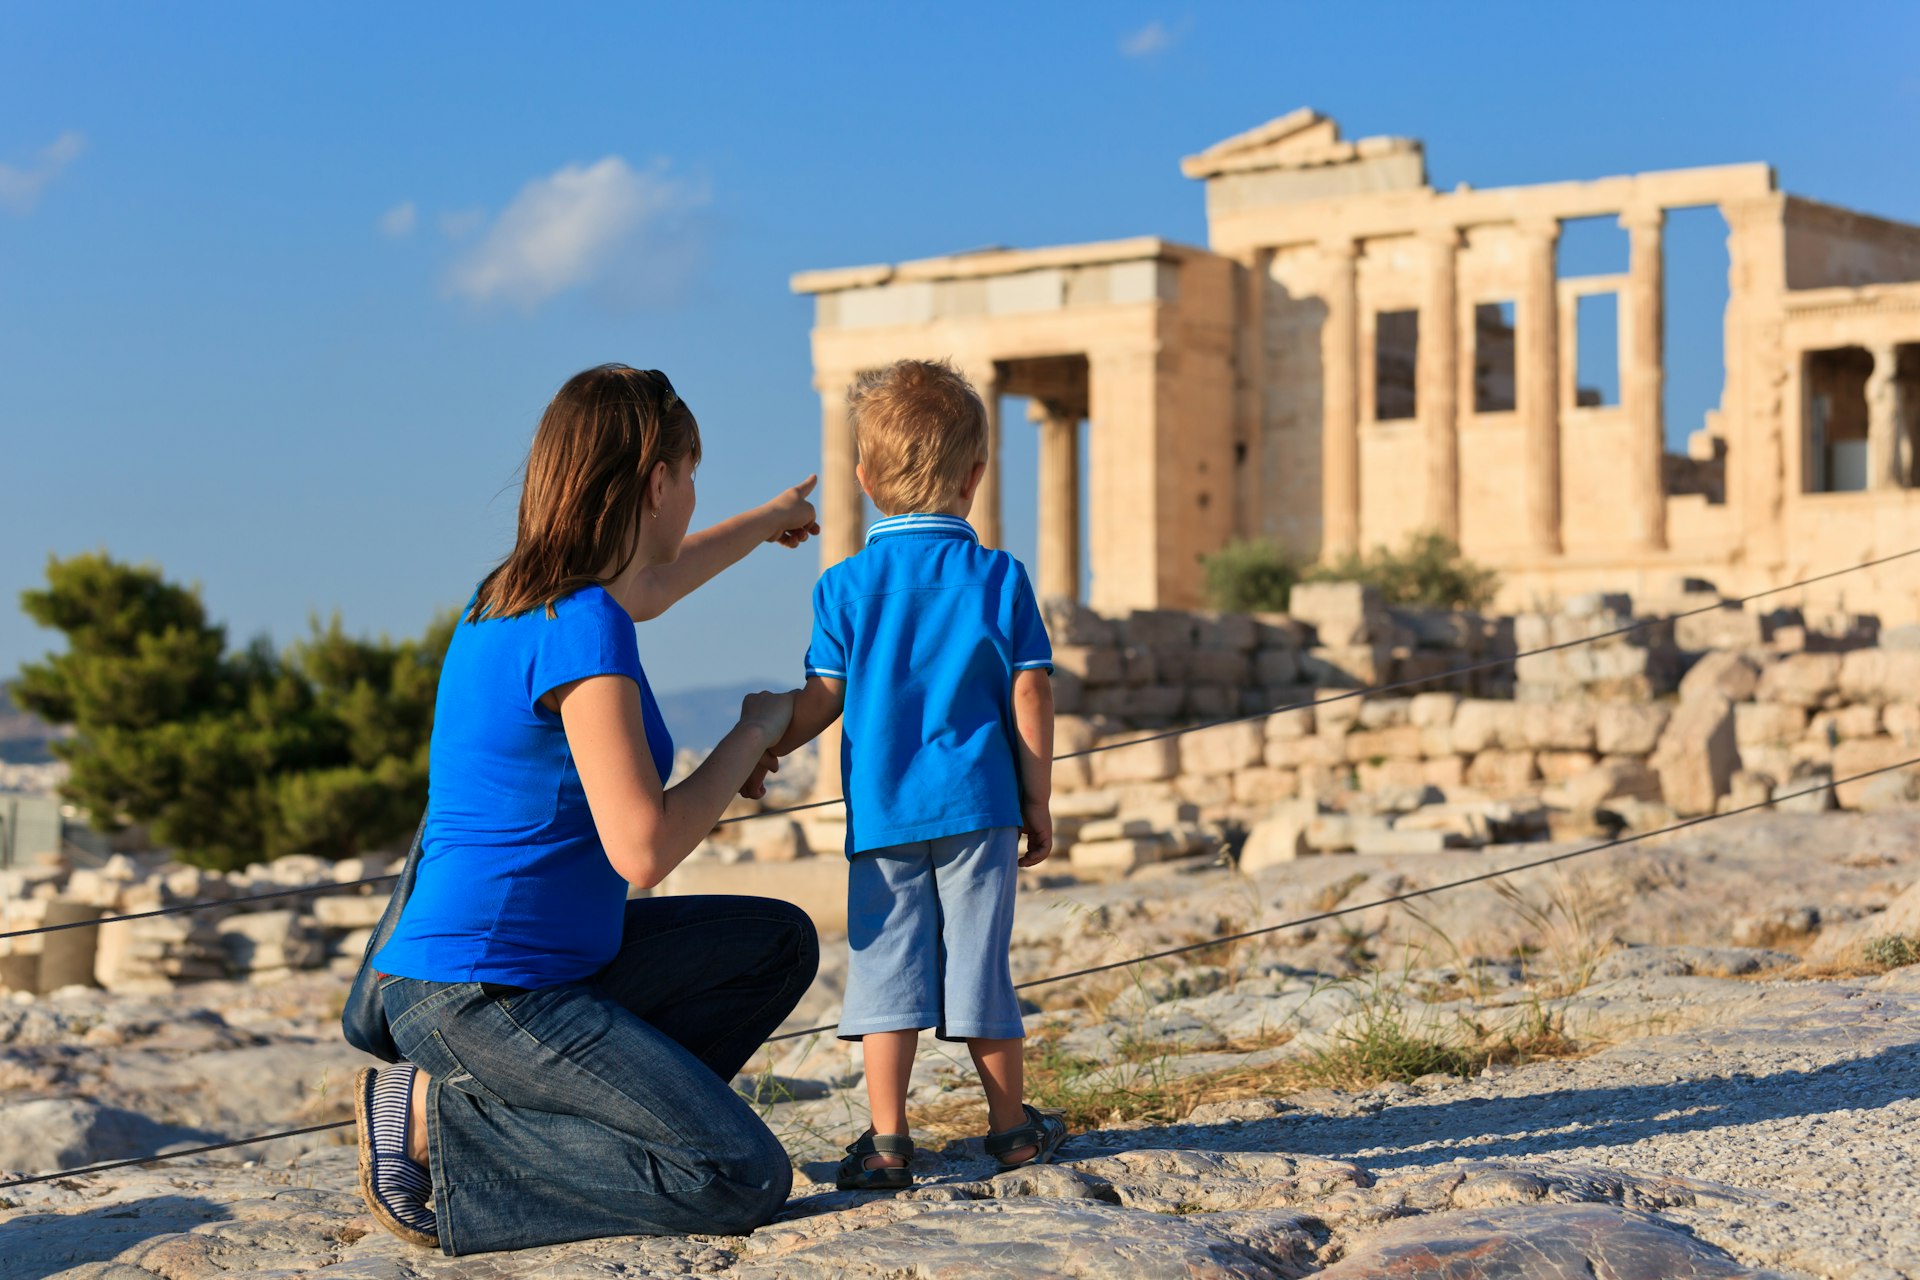 A mother and son, both dressed in blue, look at the Acropolis in Athens, Greece. The mom is pointing to the temple